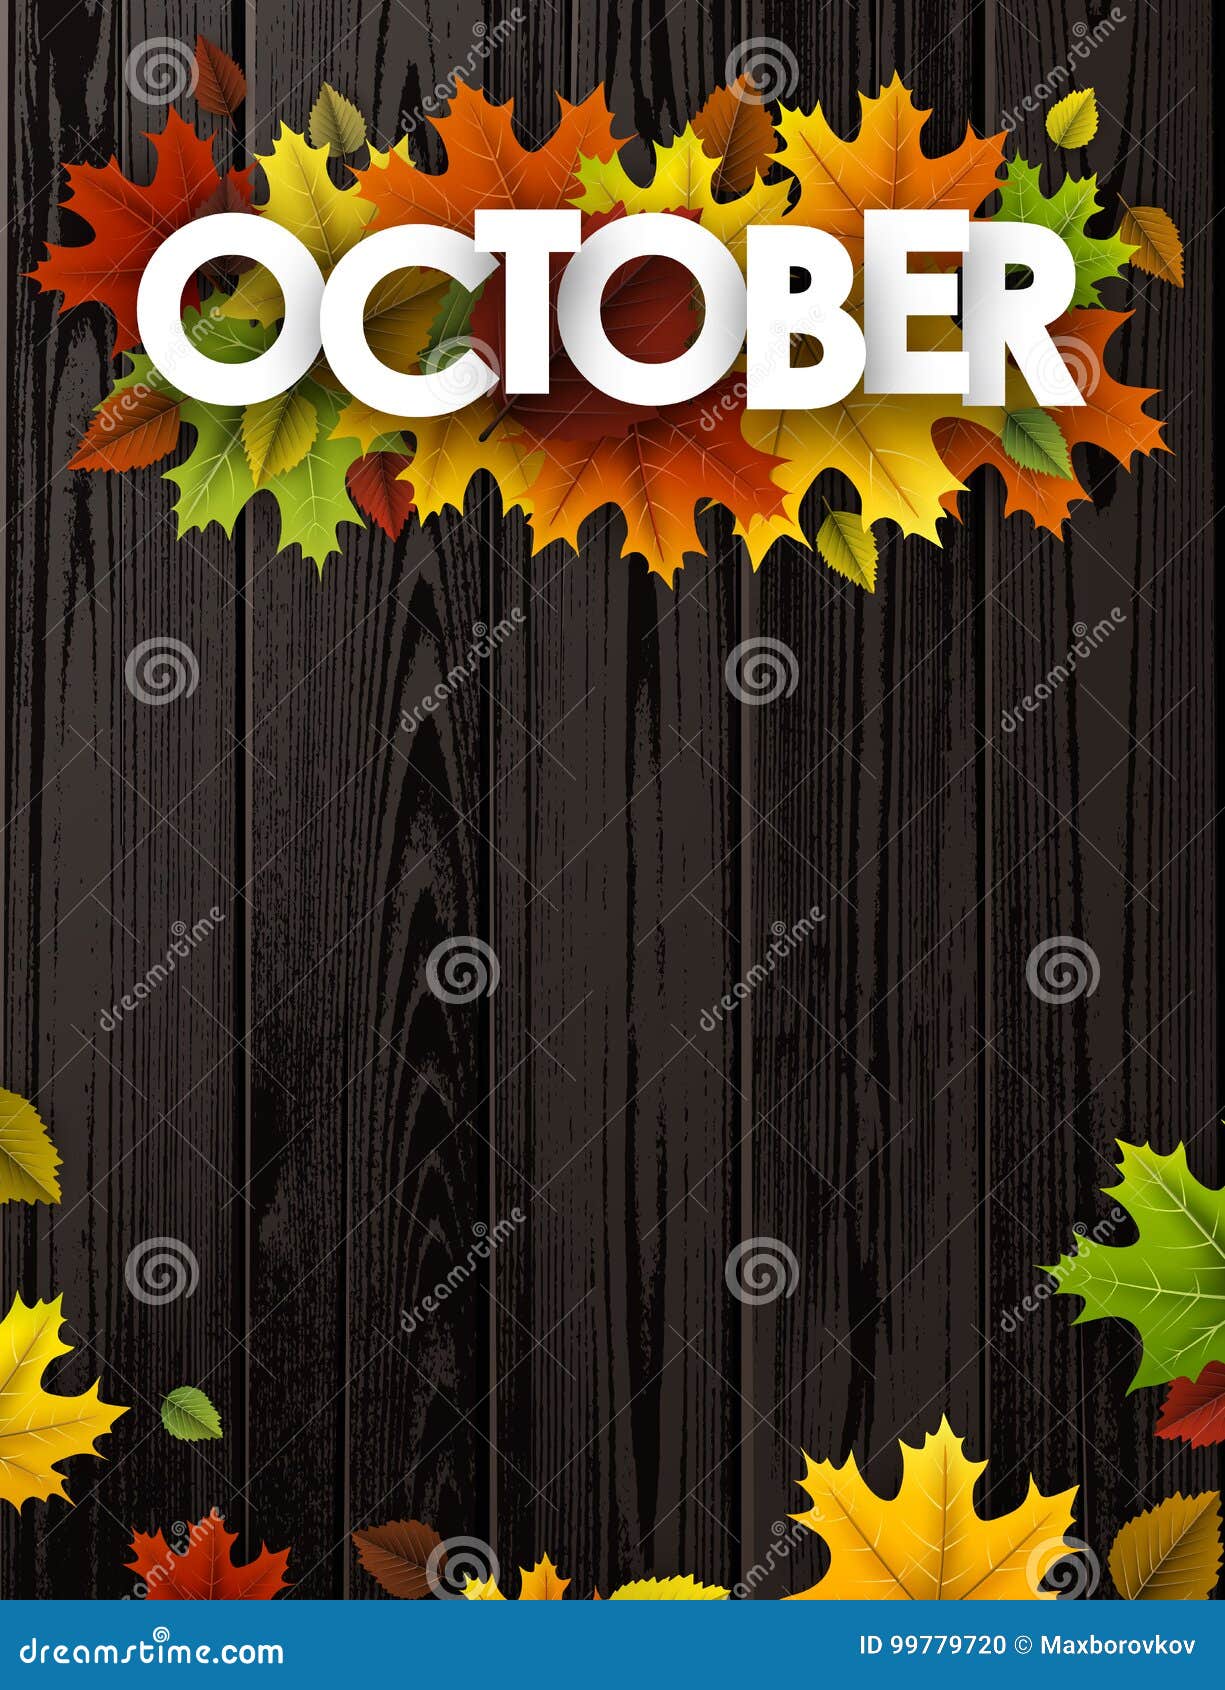 october background with colorful leaves.